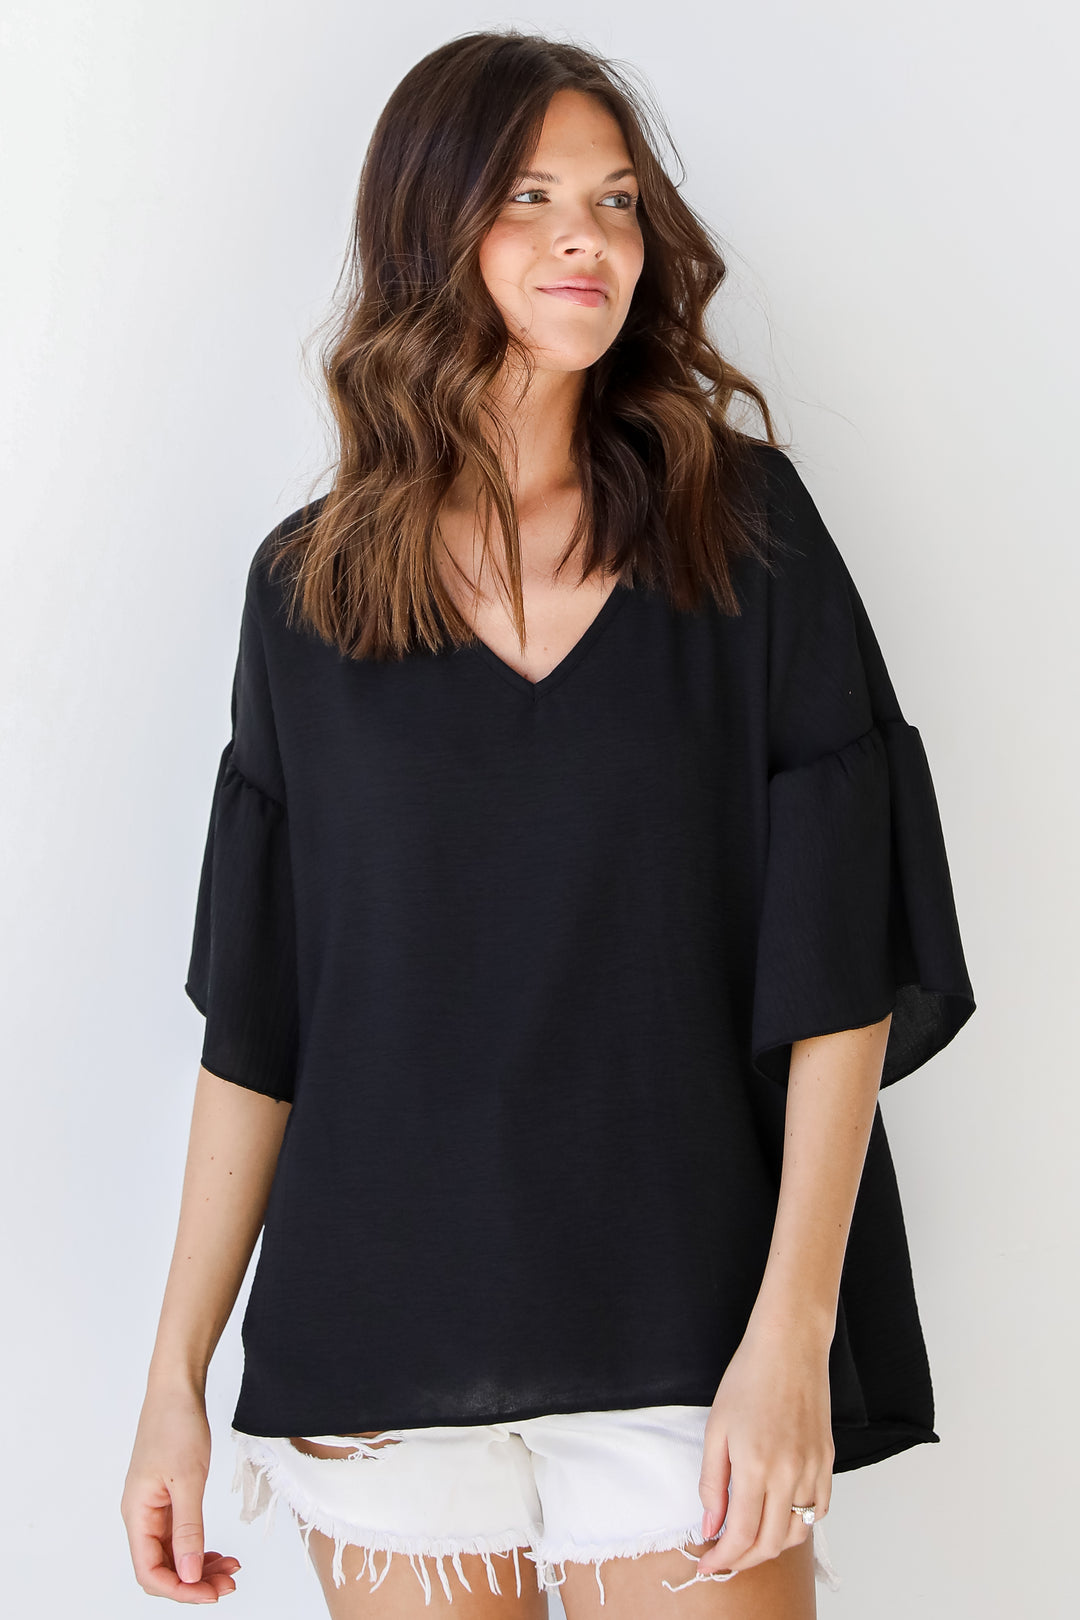 Ruffle Sleeve Blouse in black front view